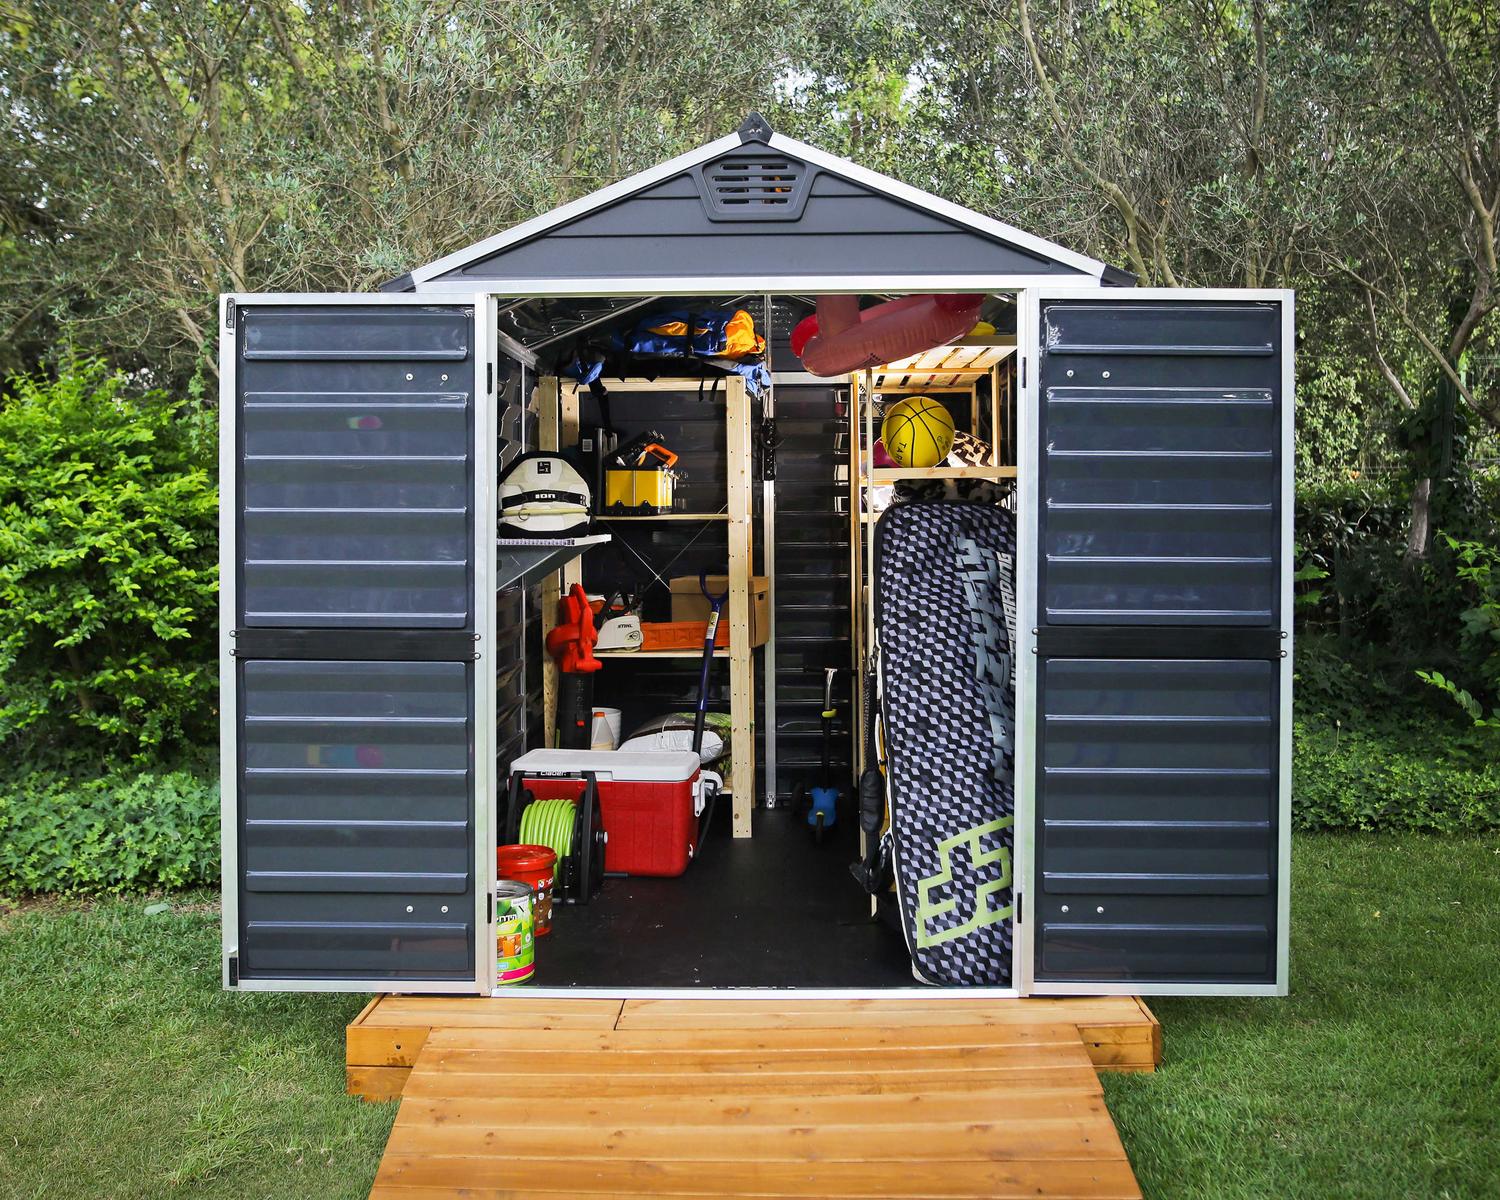 Skylight 6' x 8' Outdoor Plastic Shed with Open Doors Midnight Grey Polycarbonate Walls and Aluminium Frame